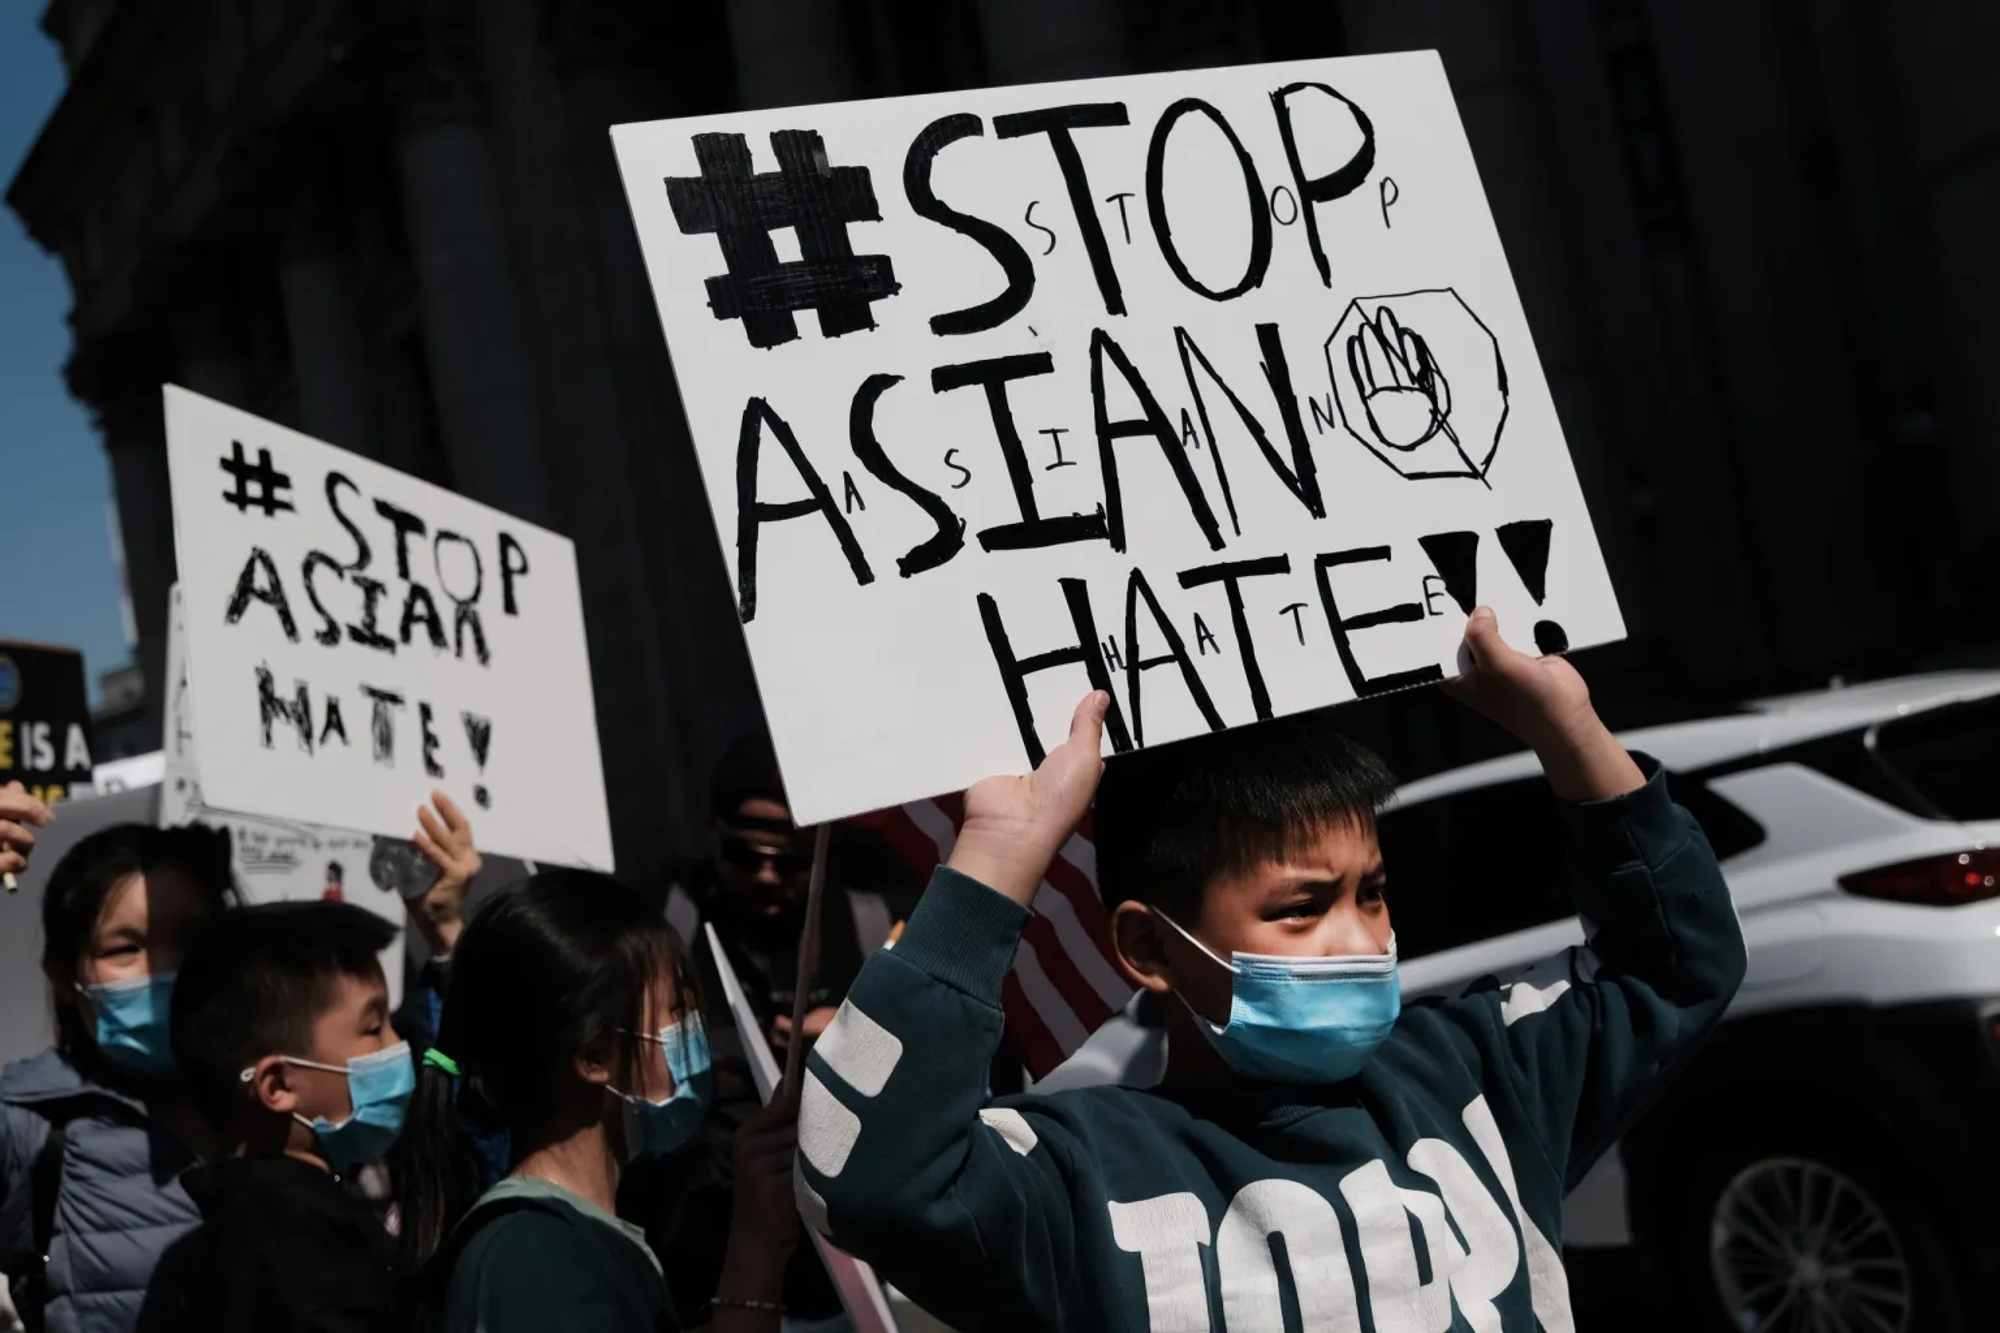 Image for The Center for Public Integrity: Asian students face racism, harassment at school. What would make it stop?